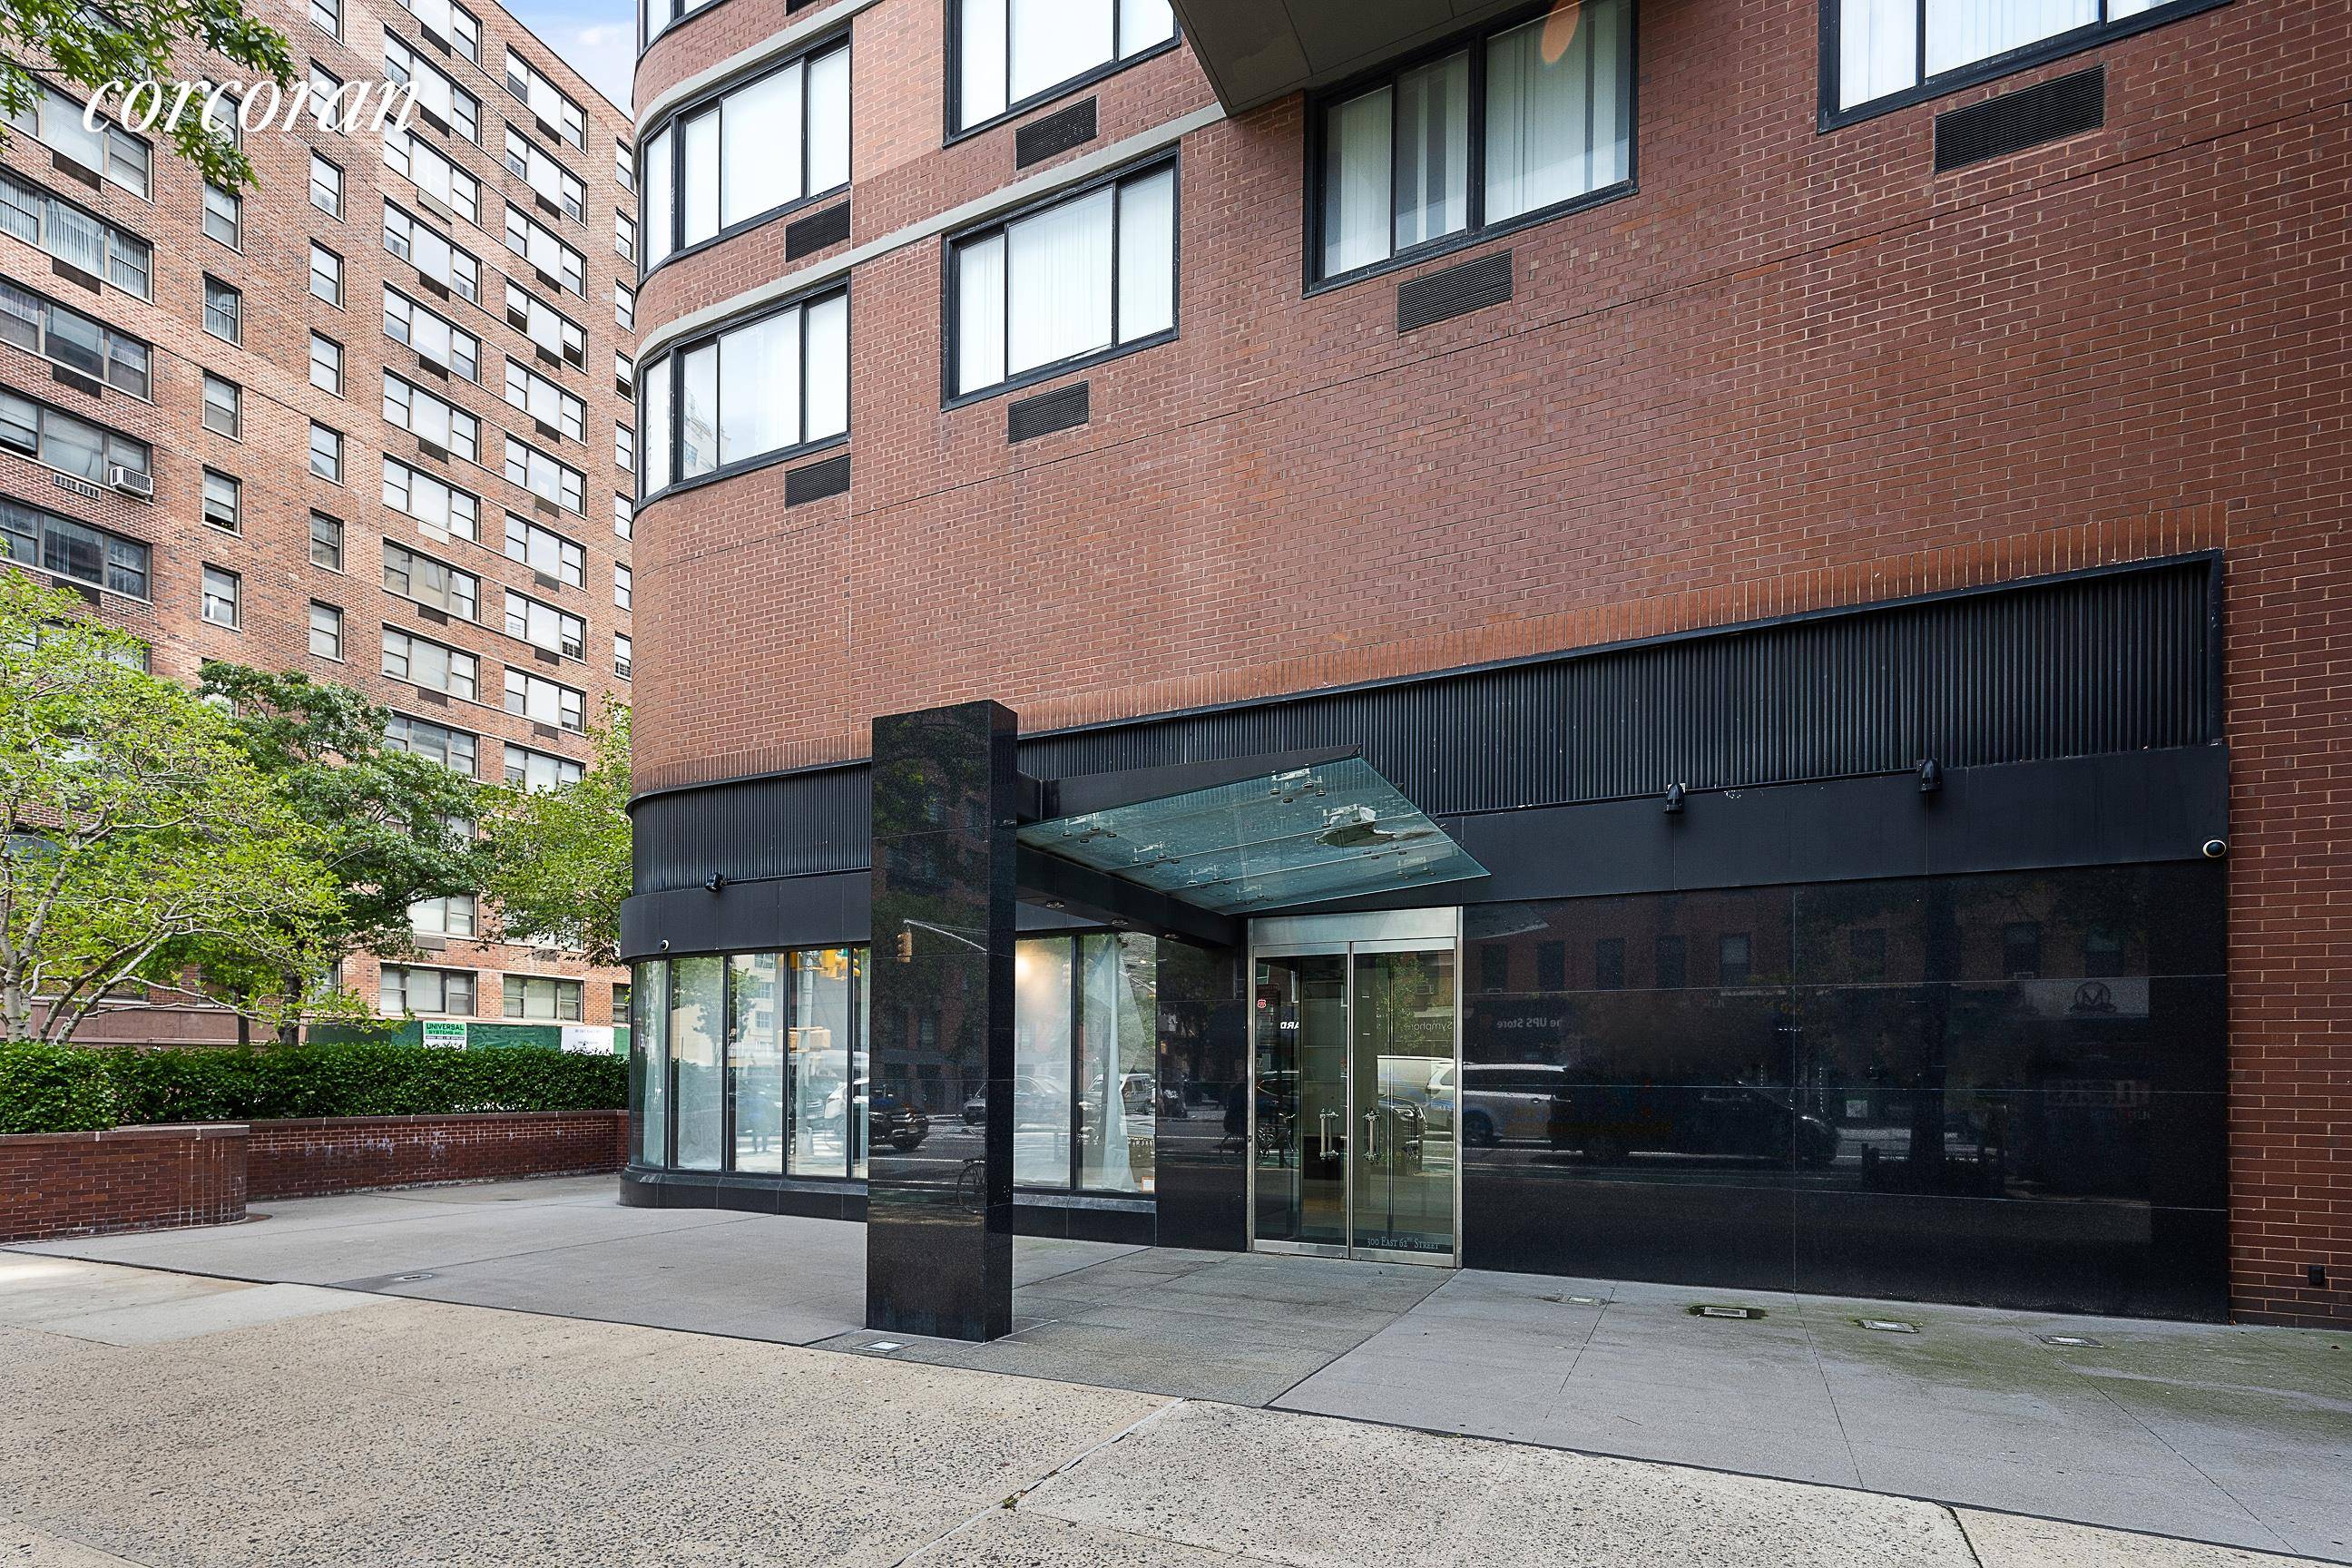 Retail or Medical opportunity not to be missed at this prime commercial space available for lease at 300 East 62nd Street at the corner of Second Avenue.